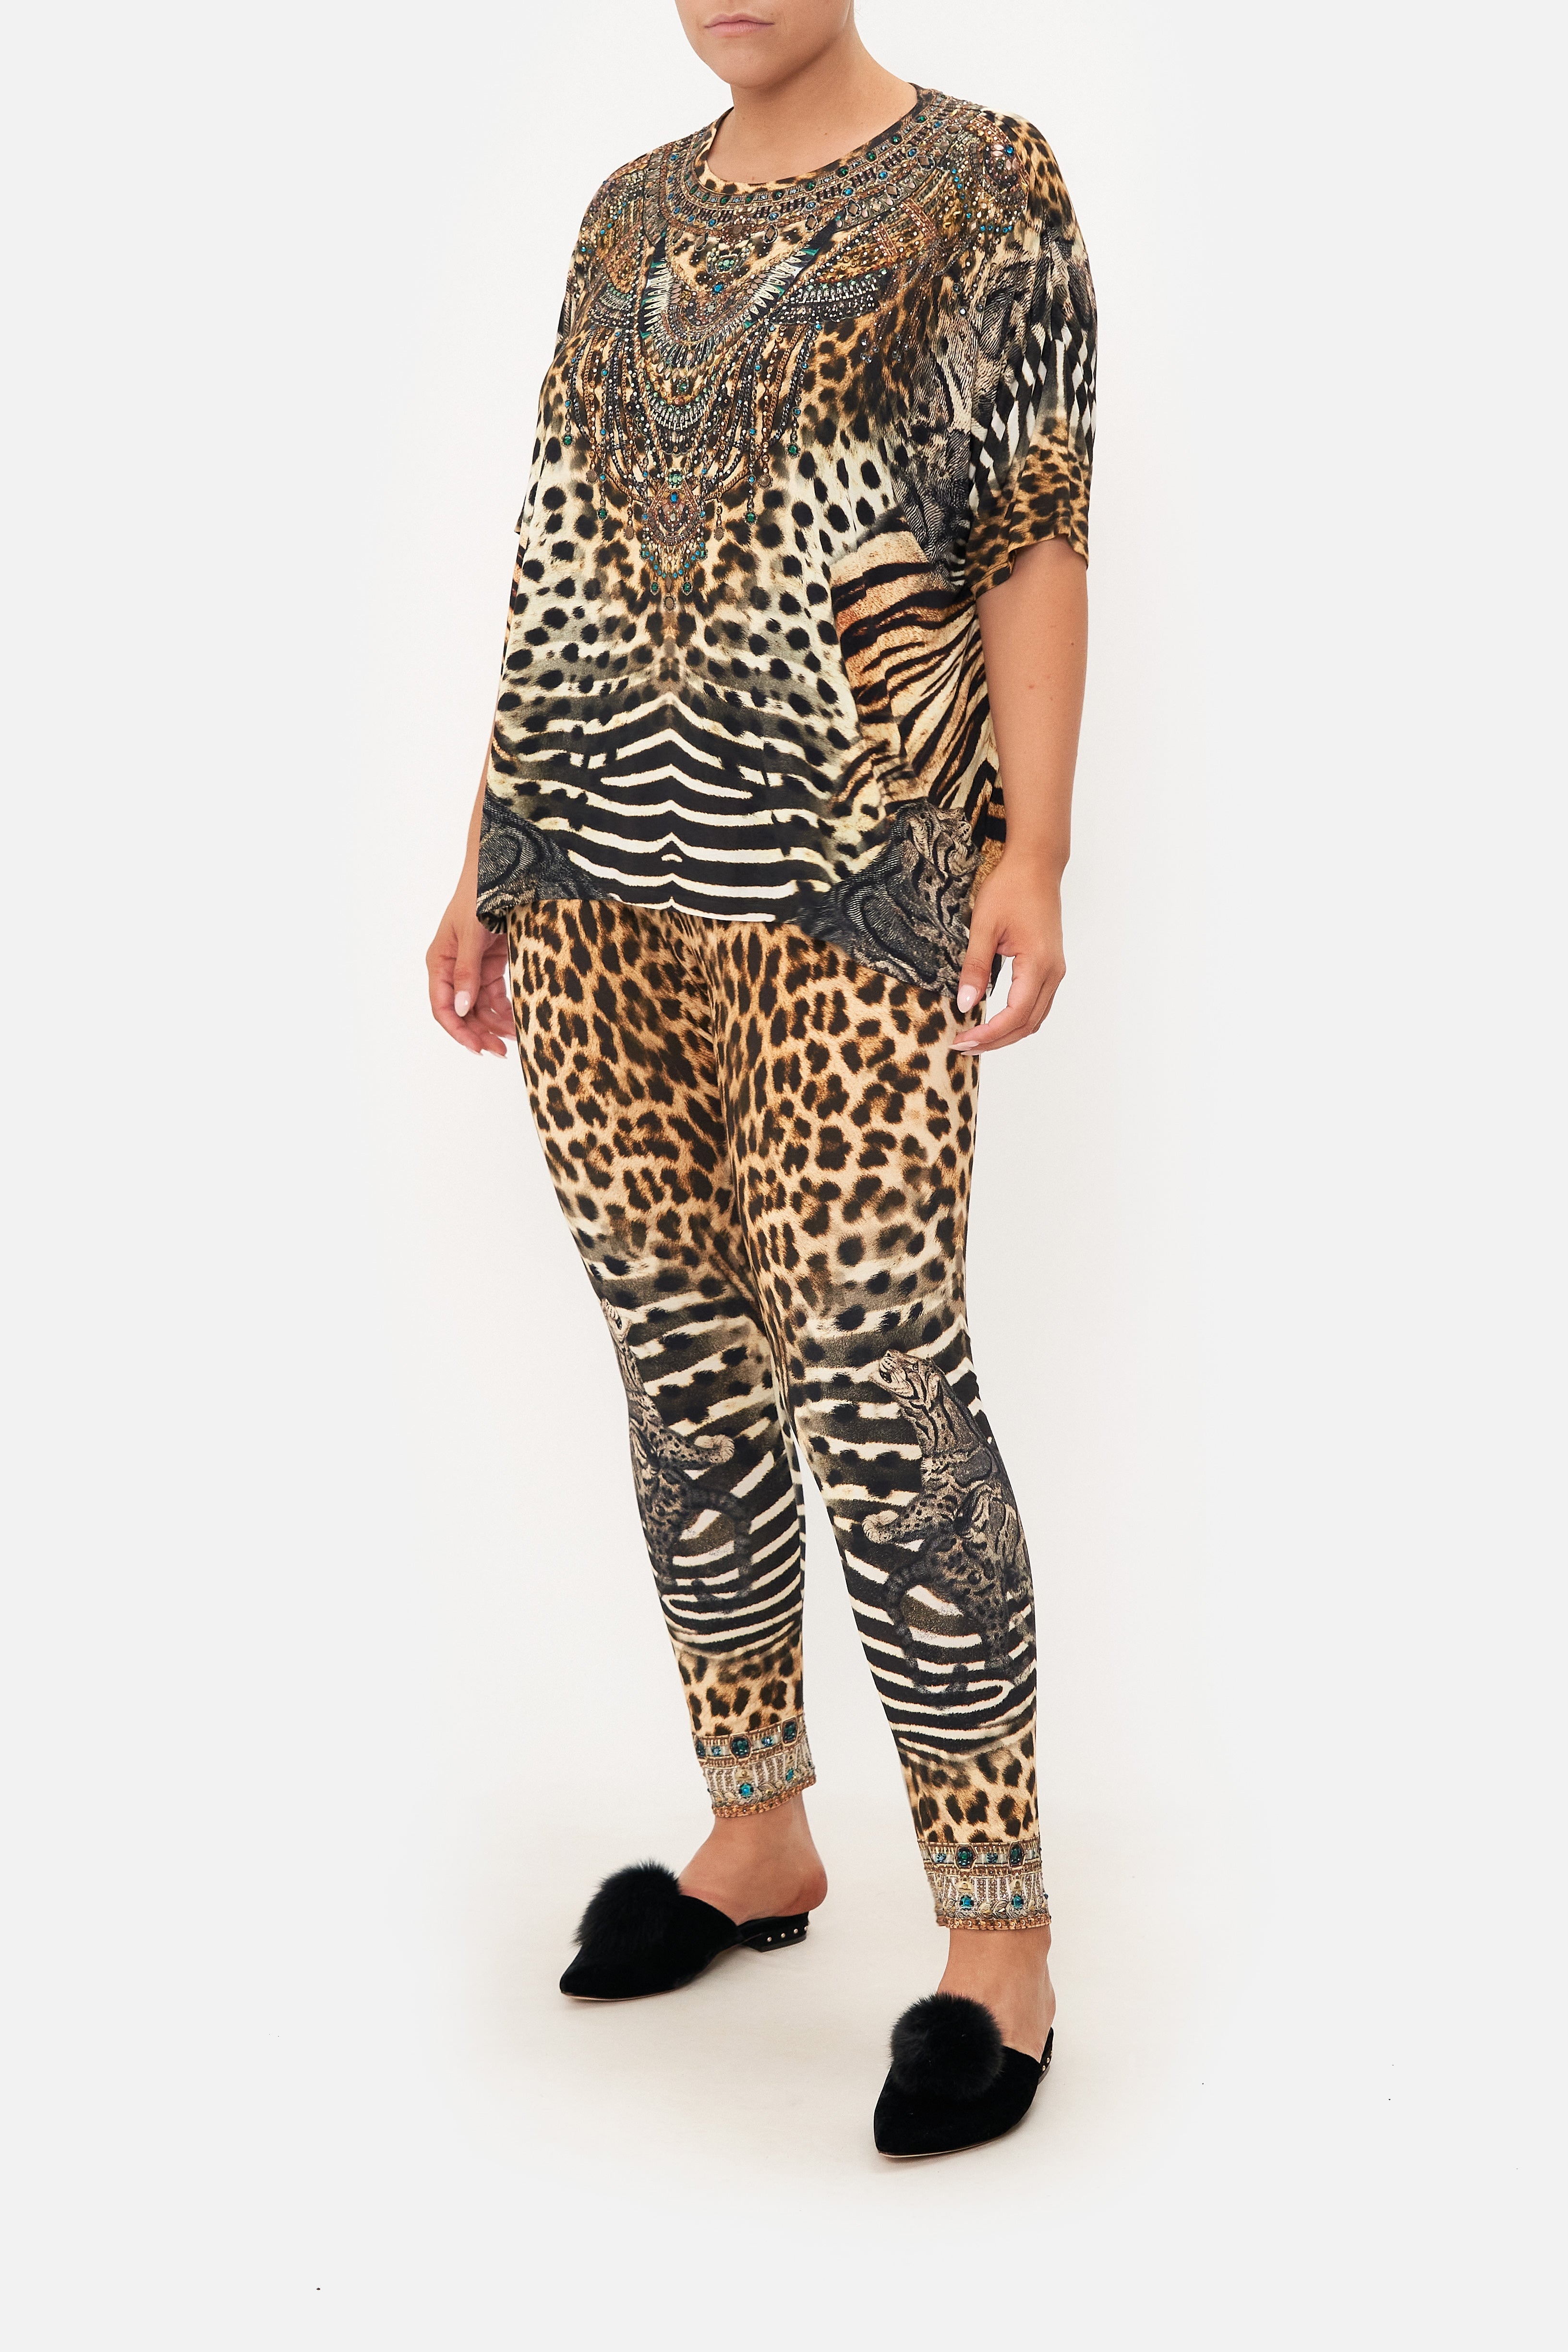 Front view of curvy model wearing CAMILLA leopard  print plus size leggings in For The Love of Leo print